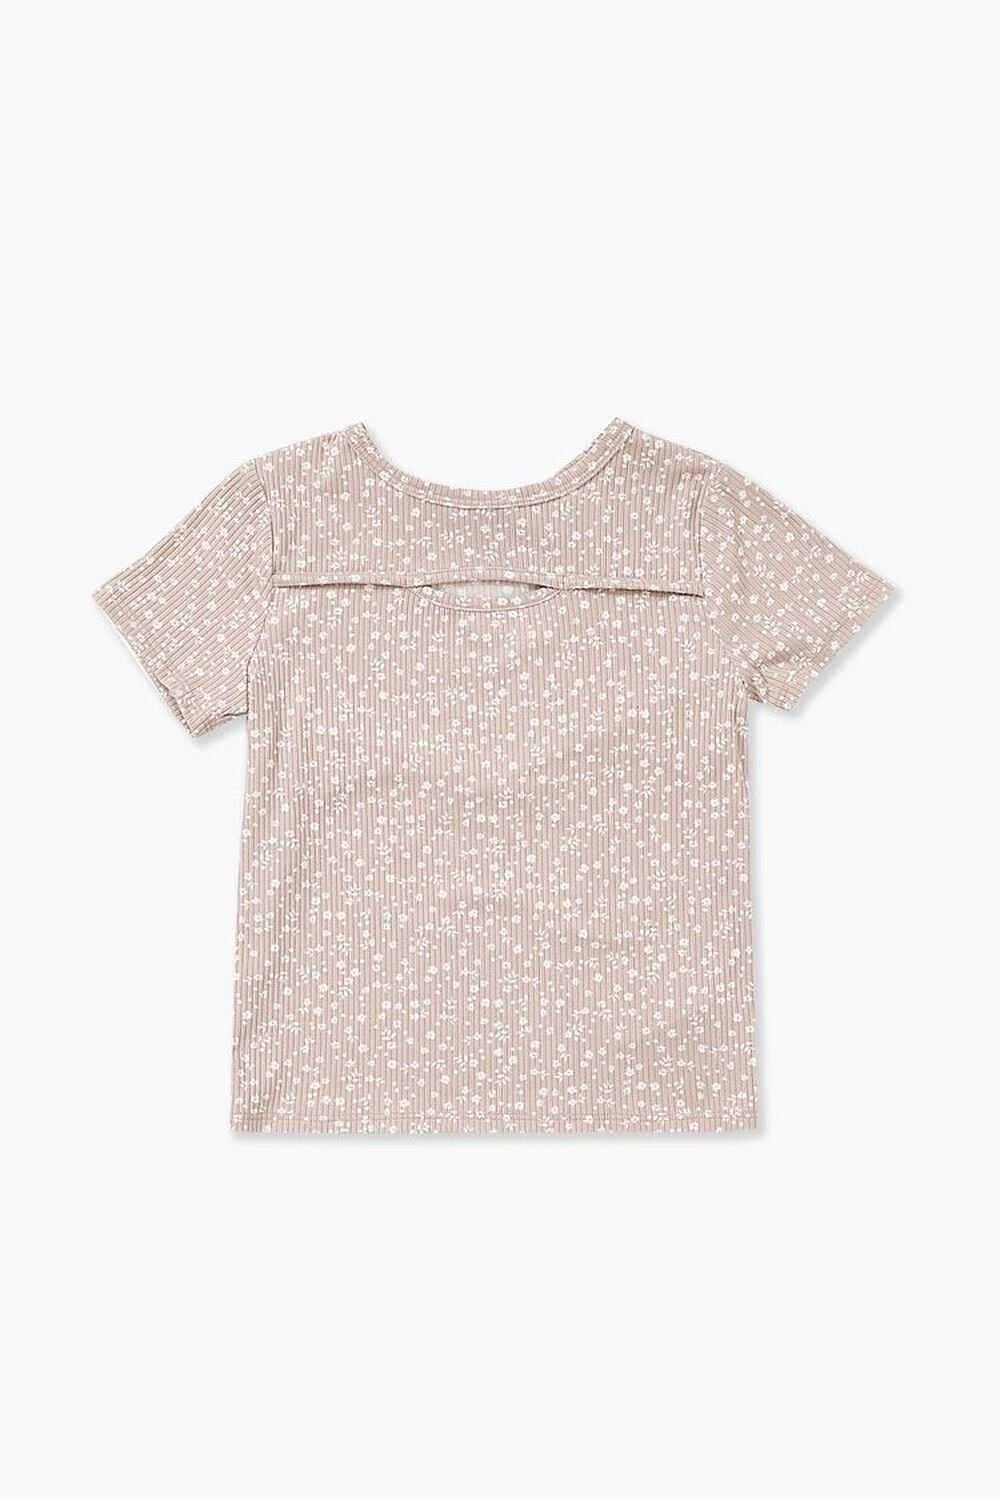 TAUPE/CREAM Girls Ditsy Floral Cutout Tee (Kids), image 1